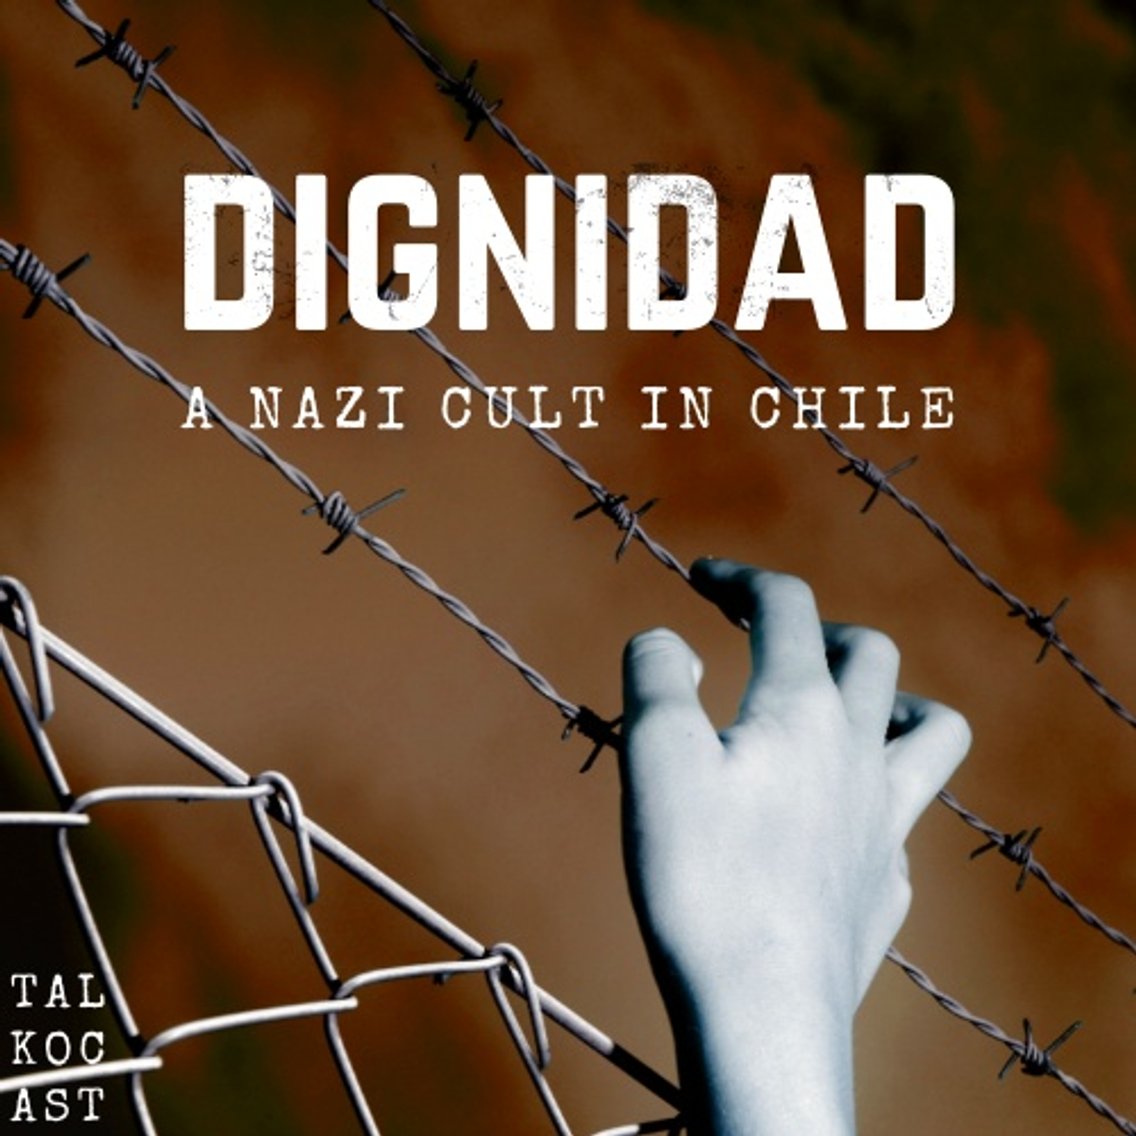 Dignidad: A Nazi Cult in Chile - Cover Image